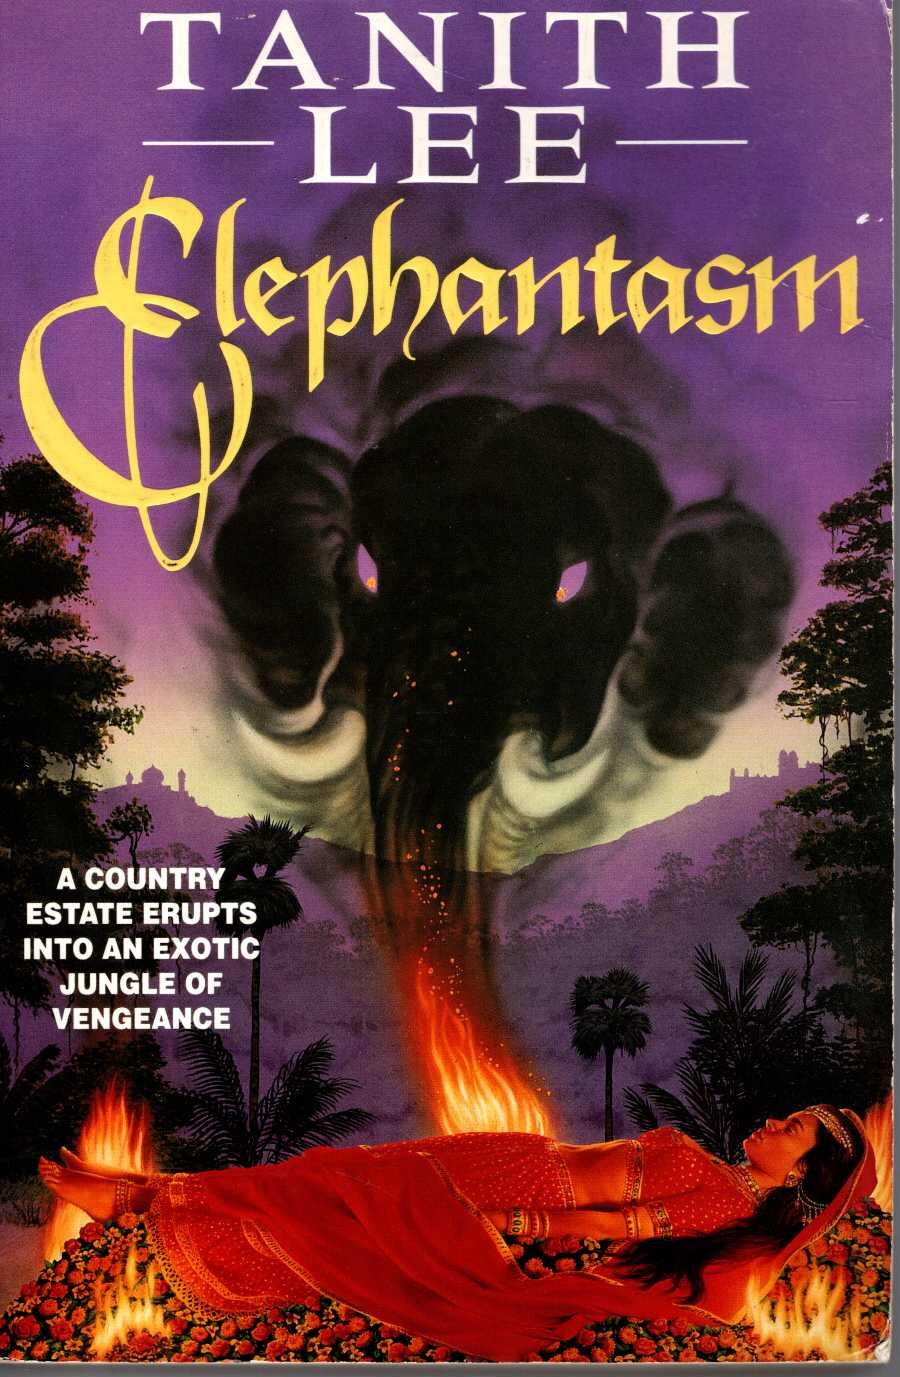 Tanith Lee  ELEPHANTASM front book cover image